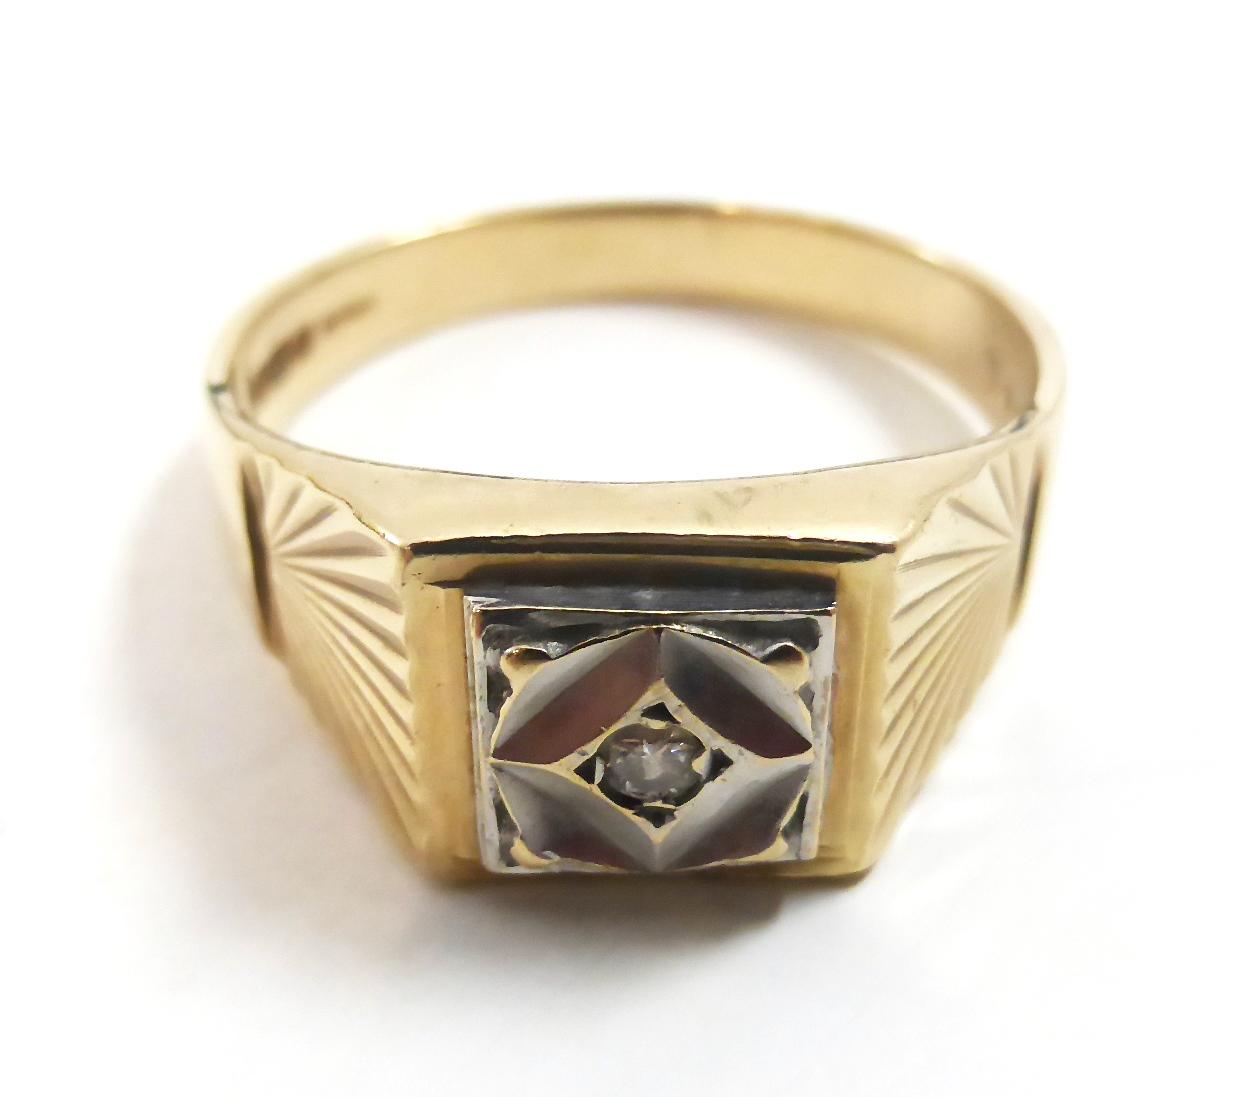 Lot 59 - A 9ct gold gentleman's signet ring with a single diamond centre stone, with fan engraved shoulders